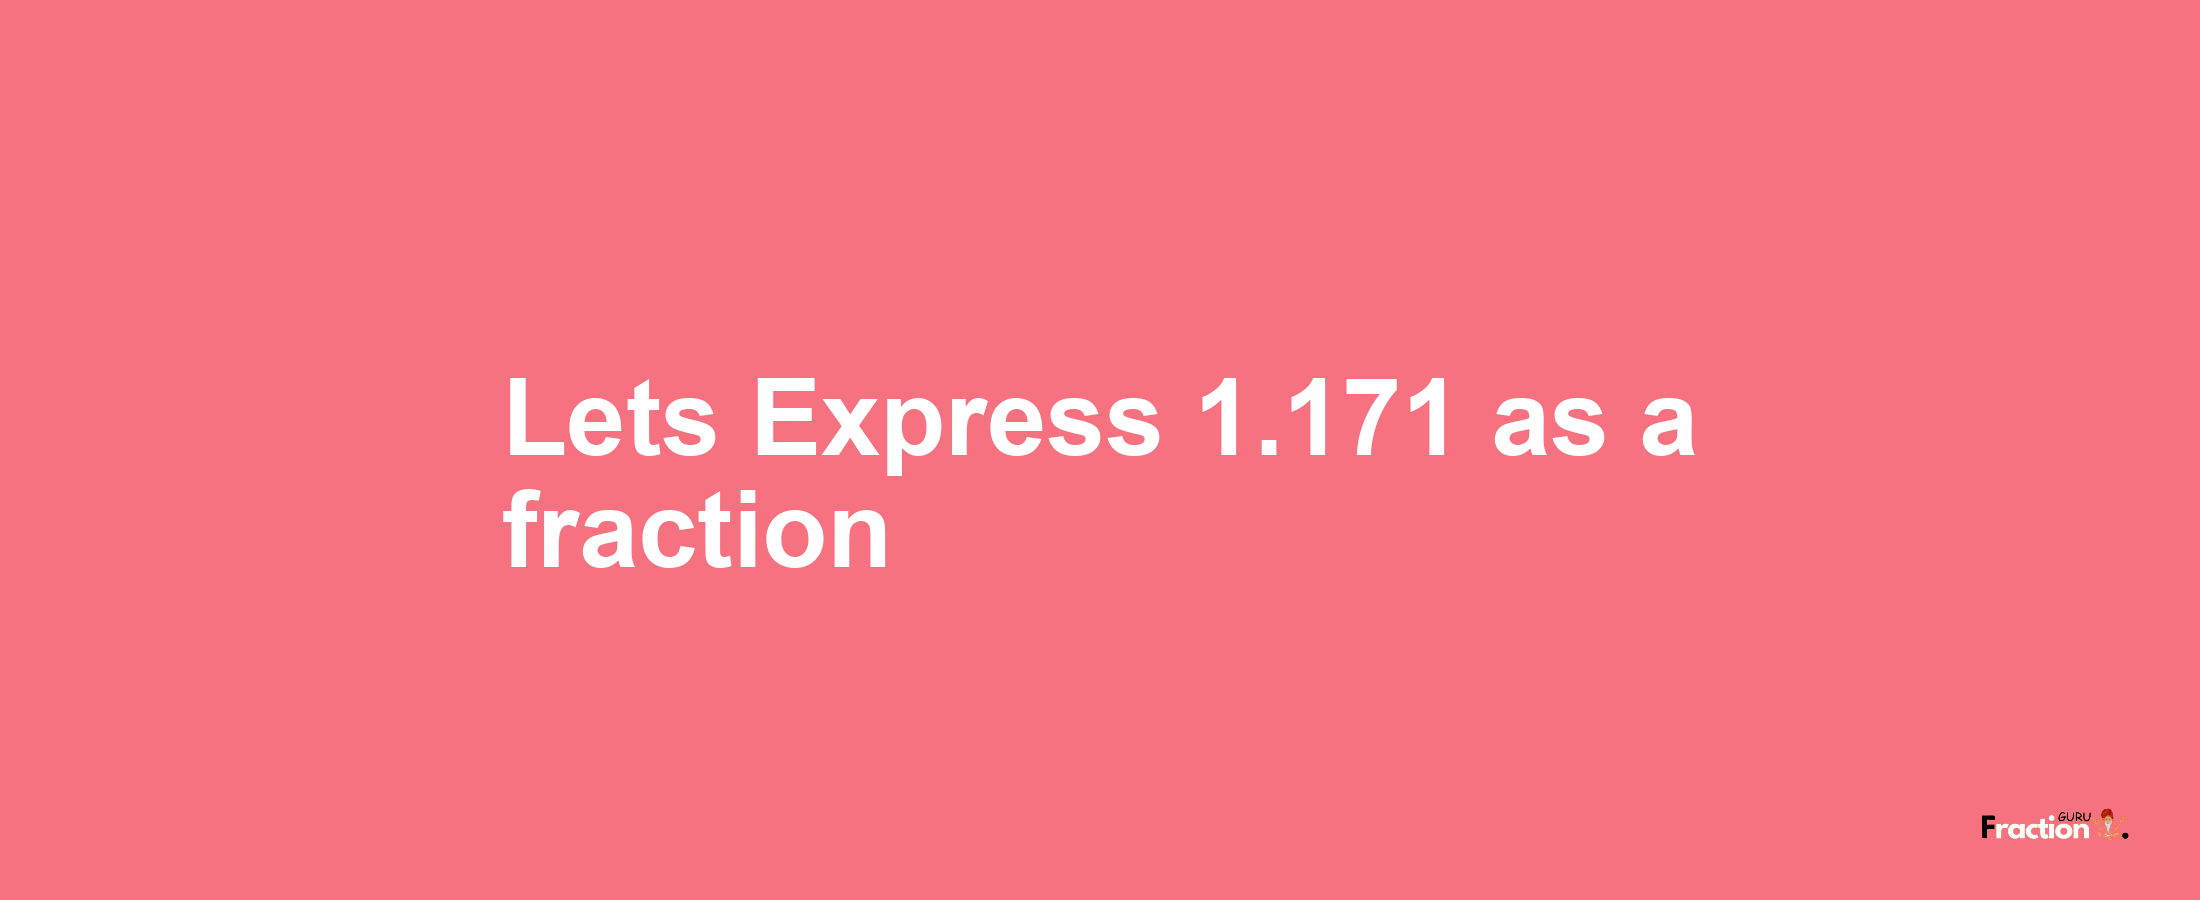 Lets Express 1.171 as afraction